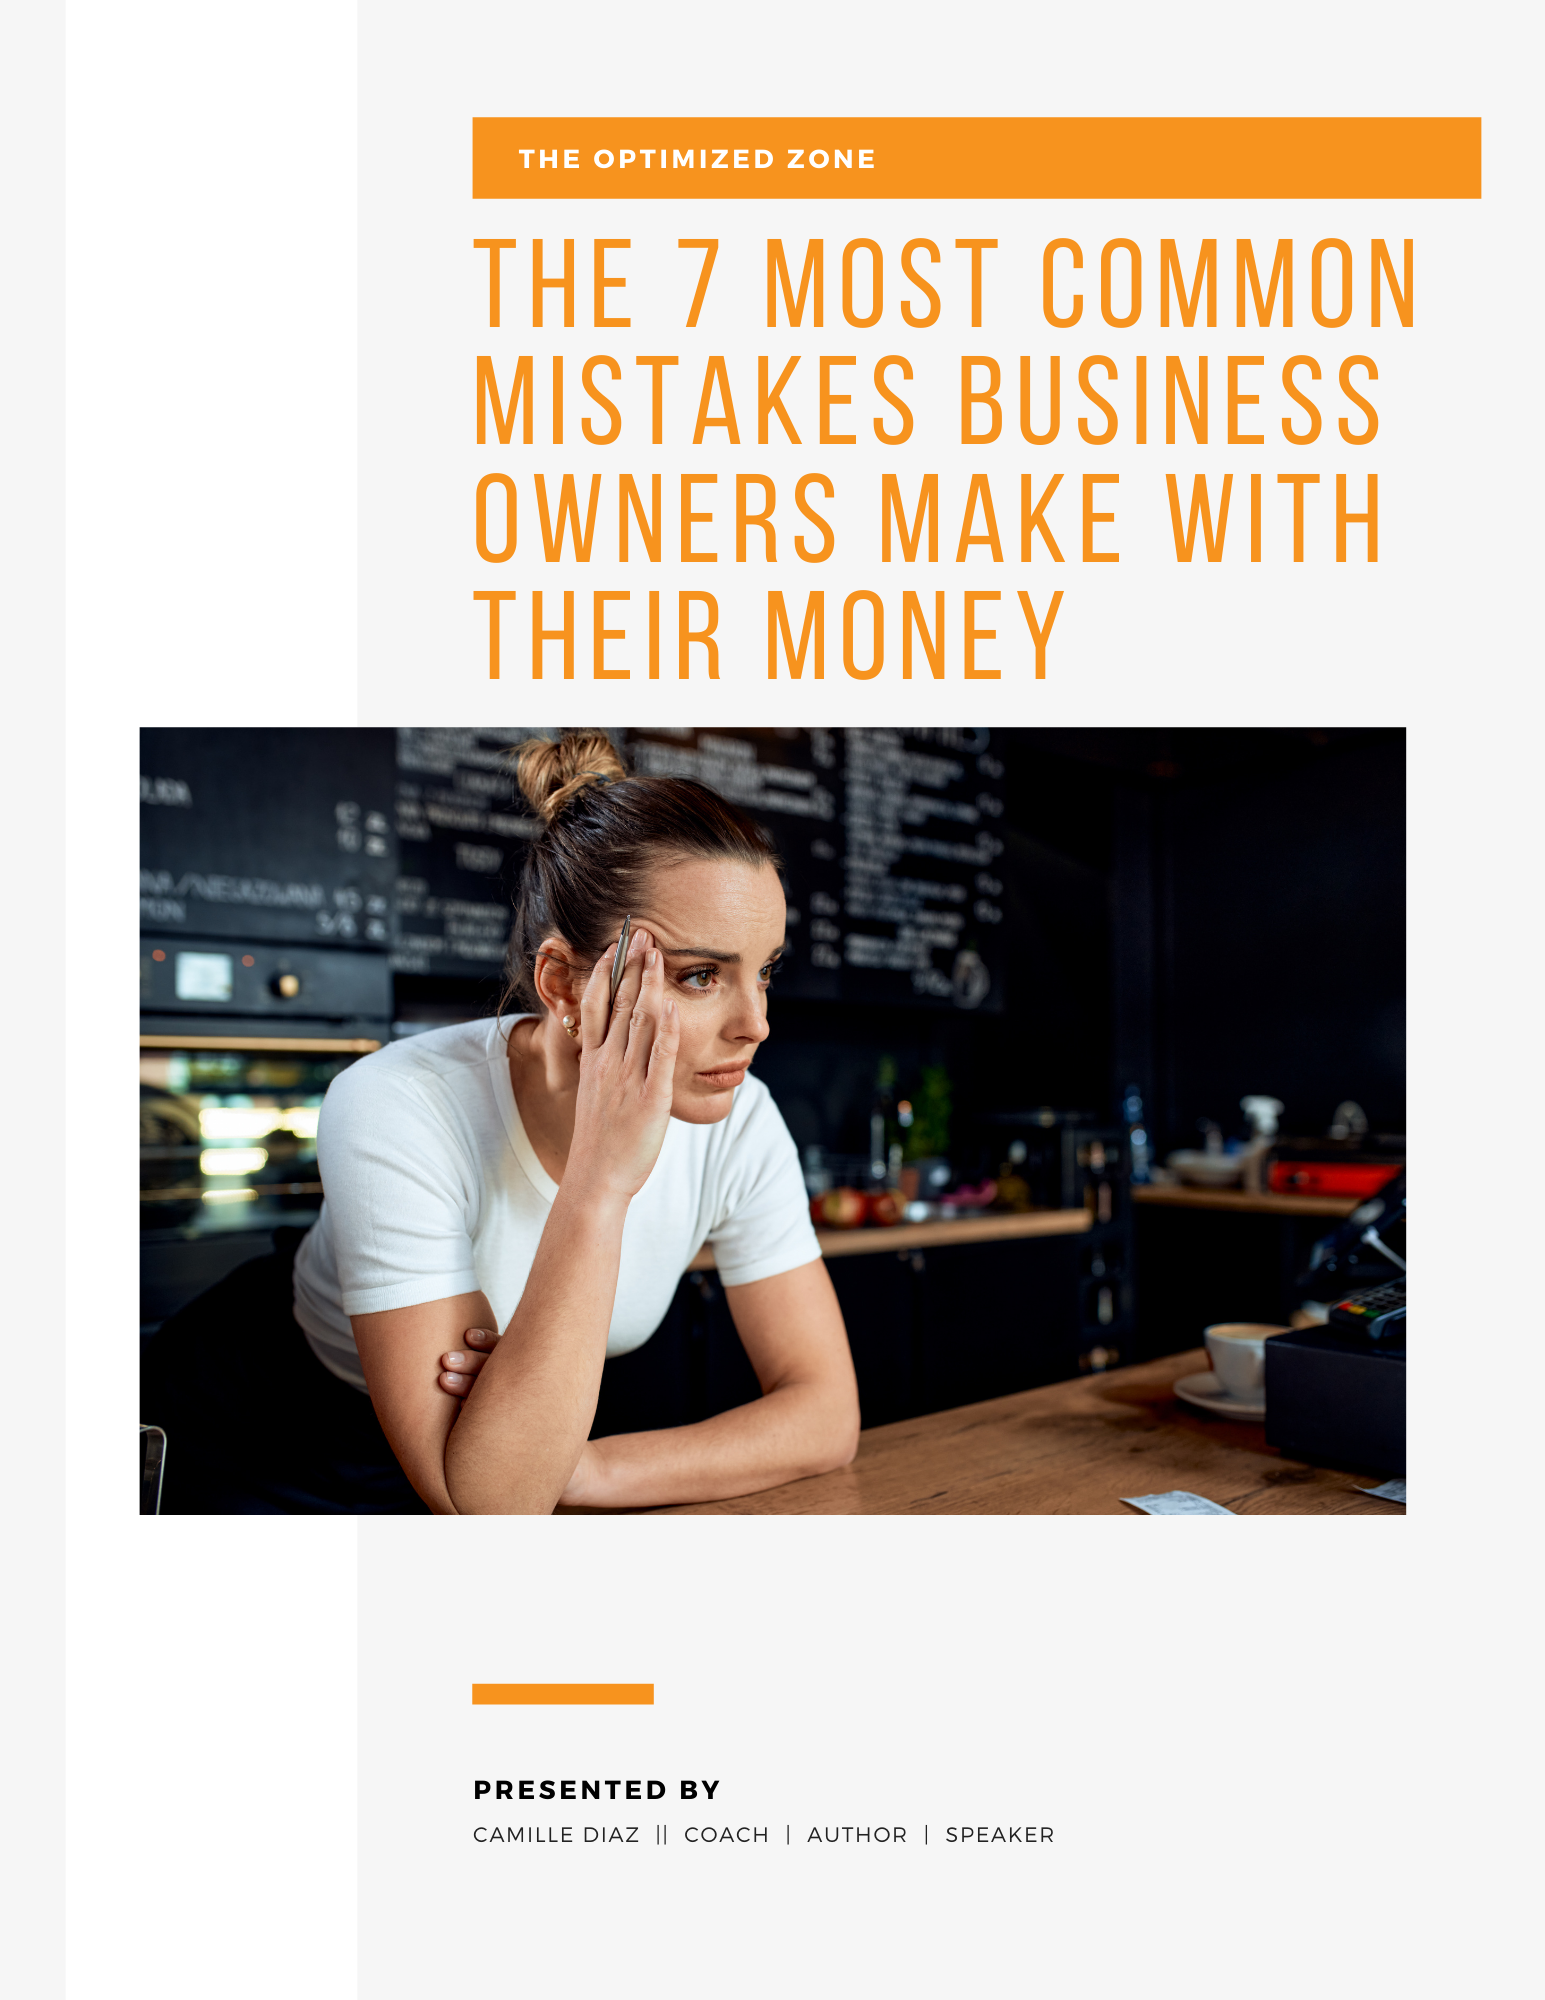 The 7 Most Common Mistakes Business Owners Make with Their Money